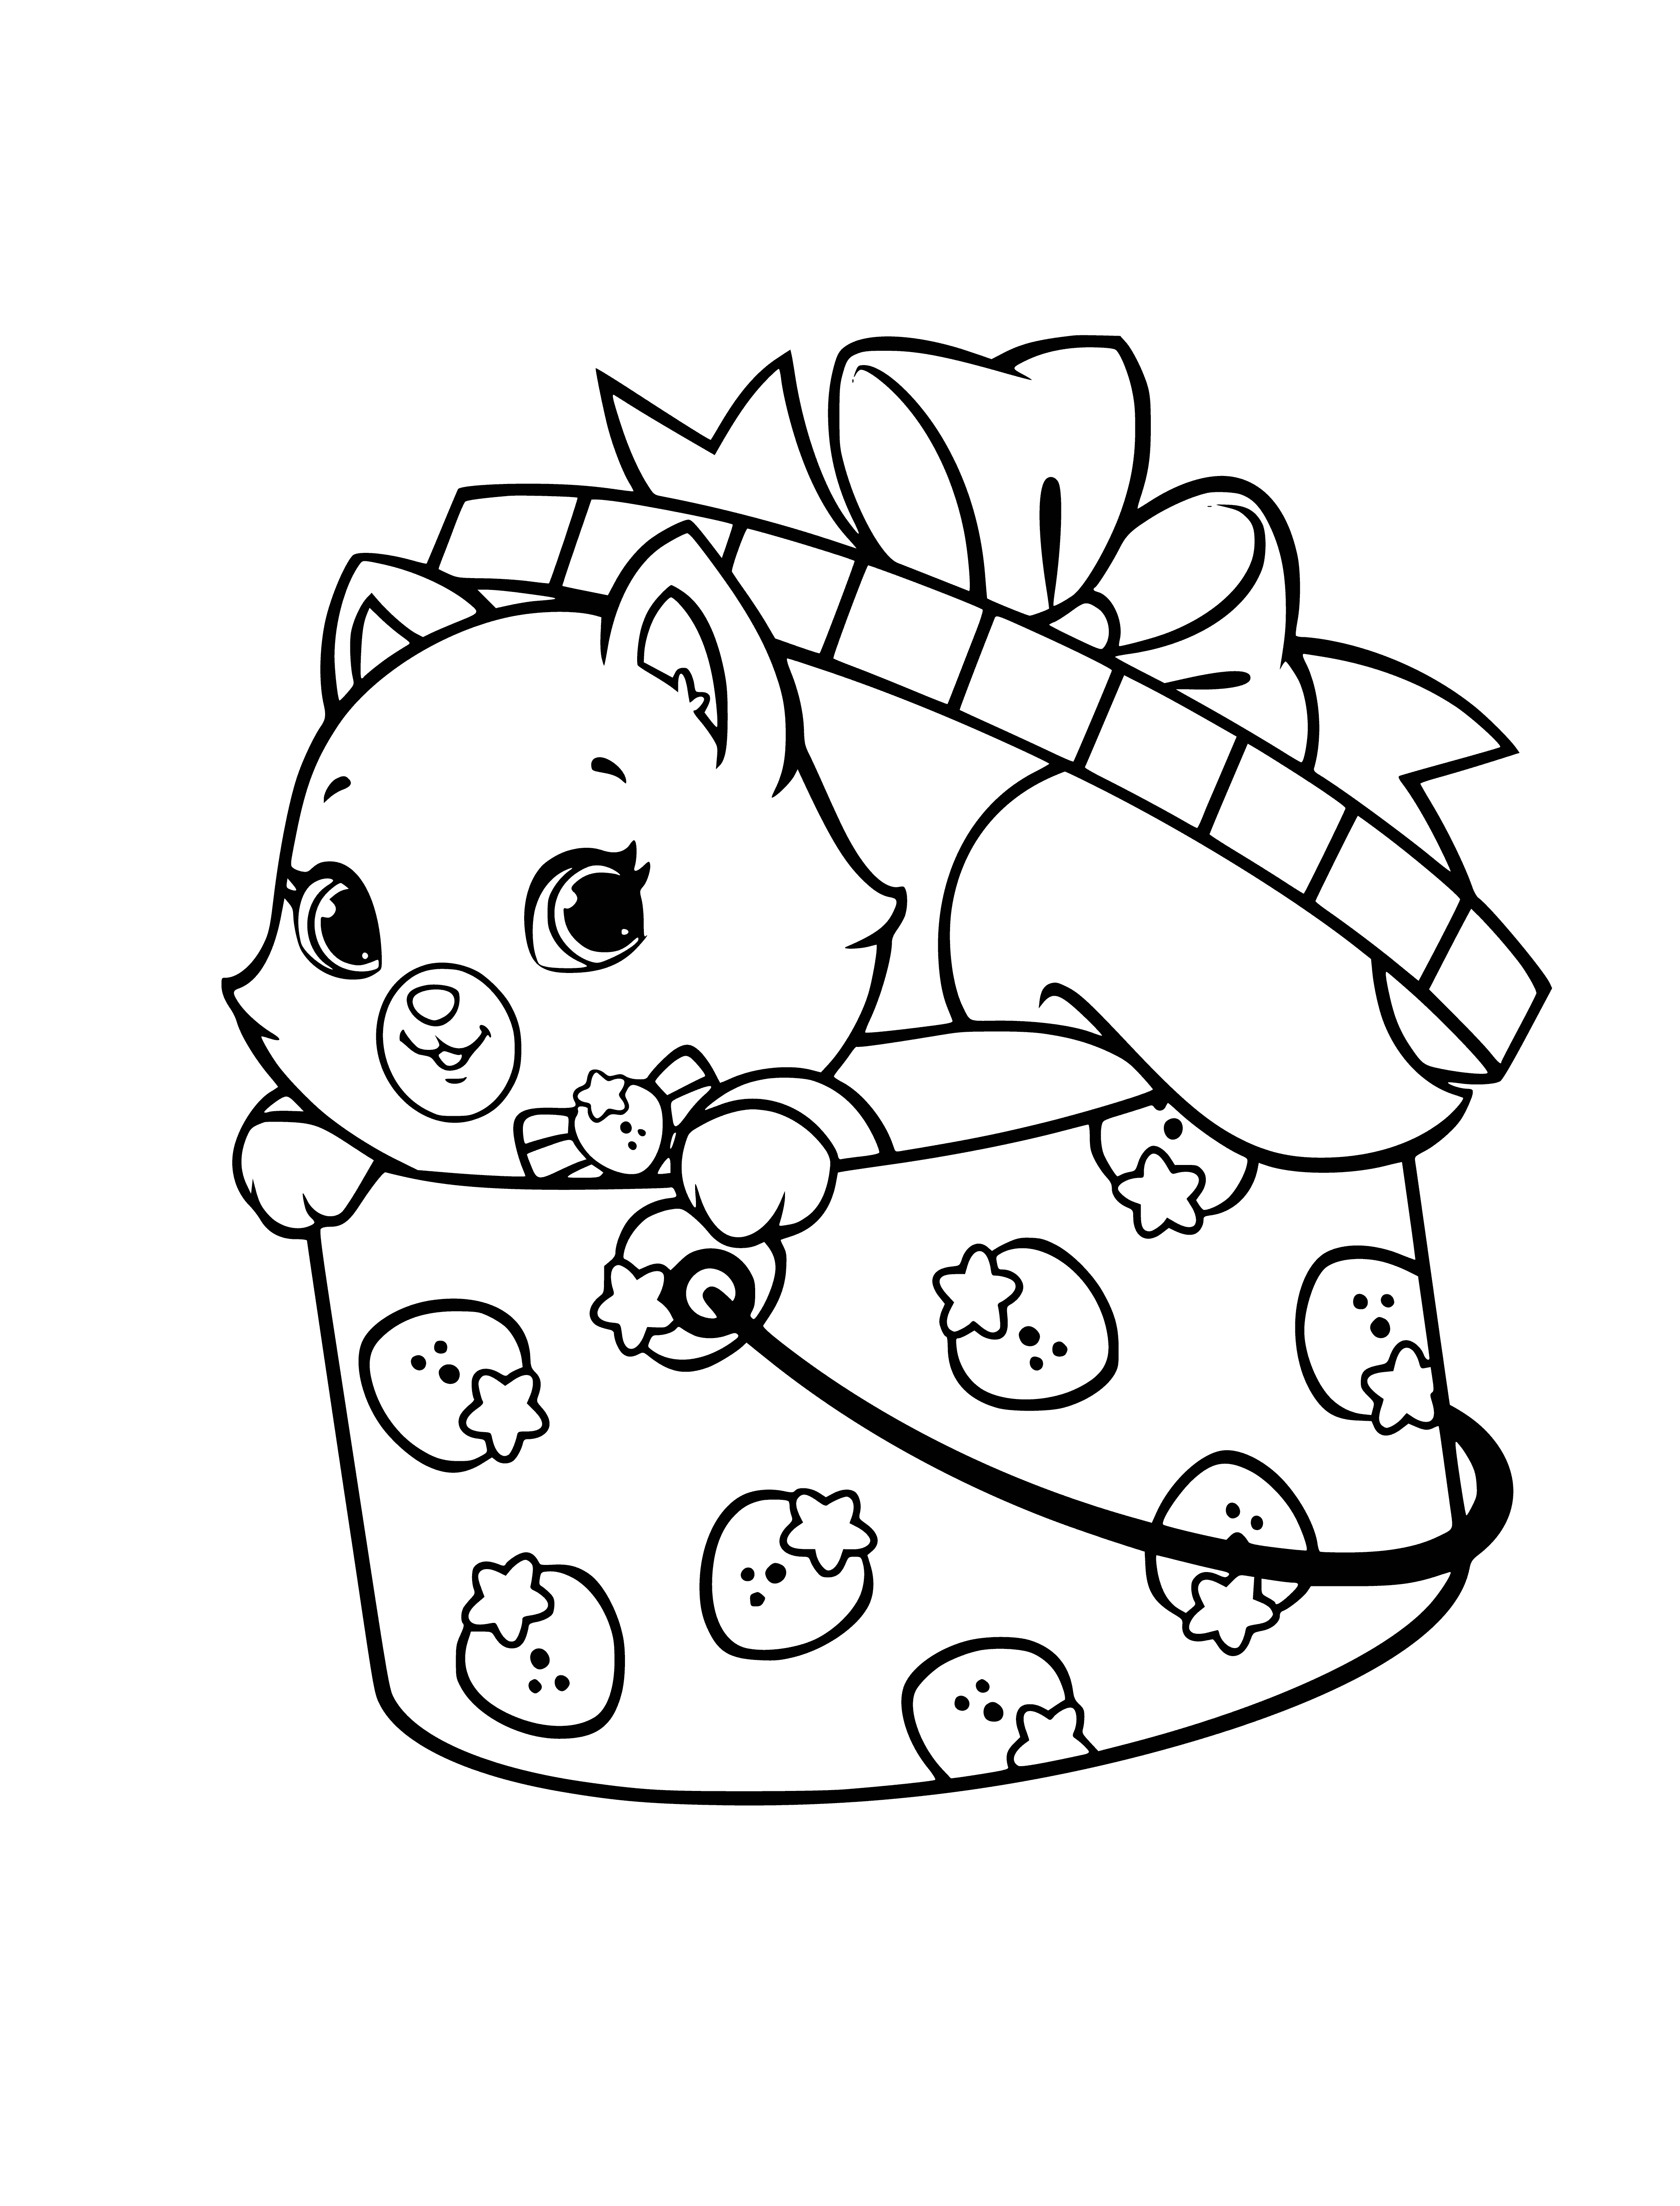 Cute orange kitten licks paw and wears pink collar with bell. Green eyes and white spots complete the coloring page.